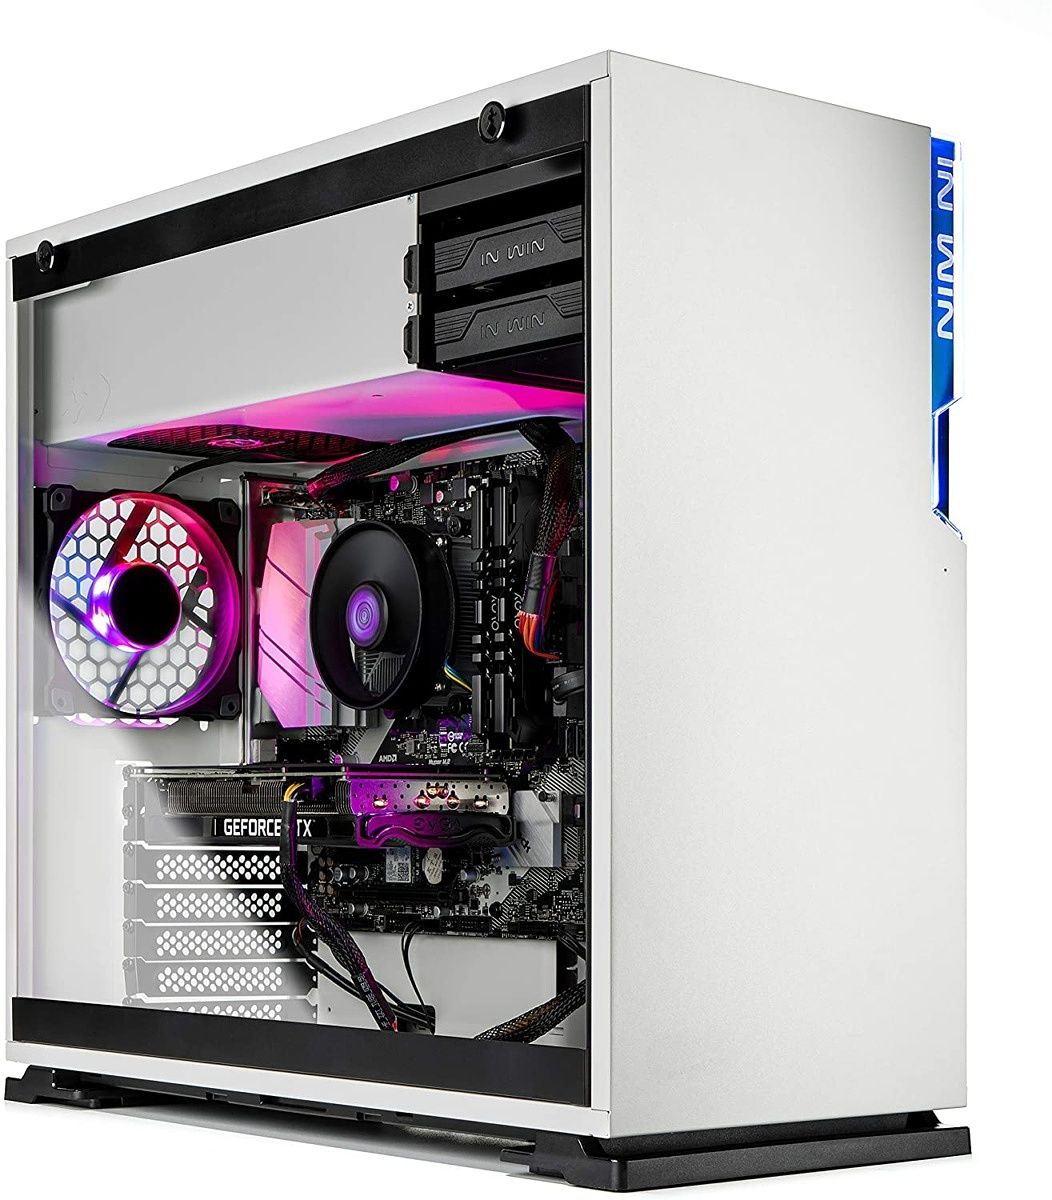 This pre-built gaming desktop includes the latest AMD Ryzen 5 5600X and a pwoerful NVIDIA GeForce 3060 Ti graphics card, making it possible to run just about any modern game without a problem.